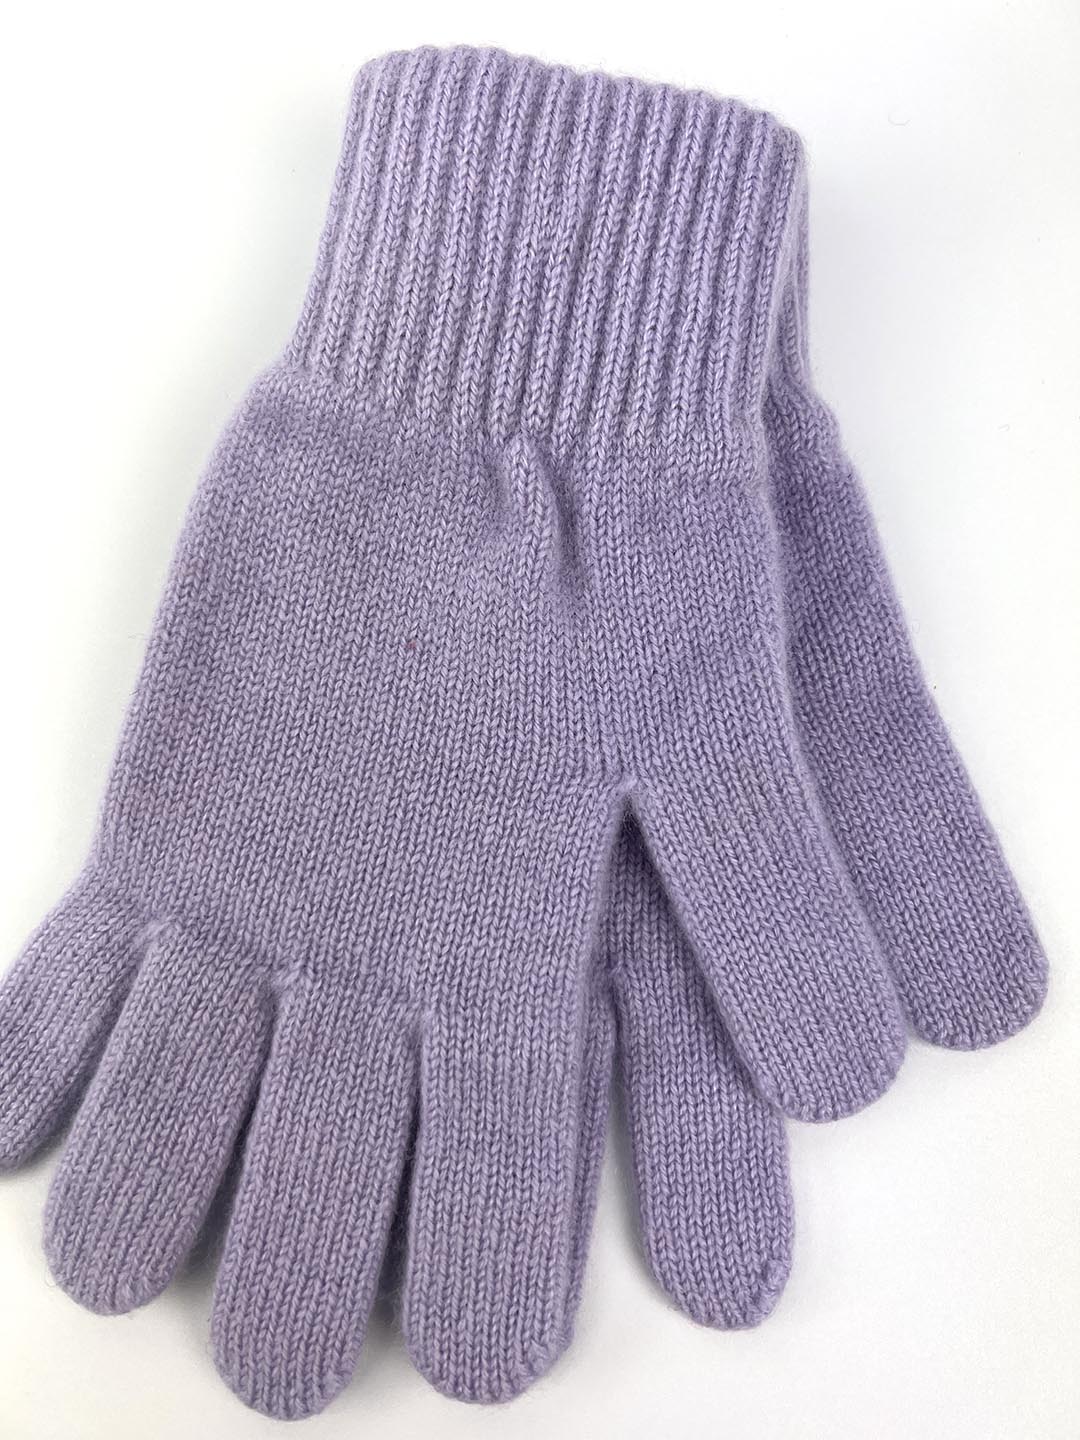 Cashmere gloves in lilac shades - lavender, quartz and orchid.